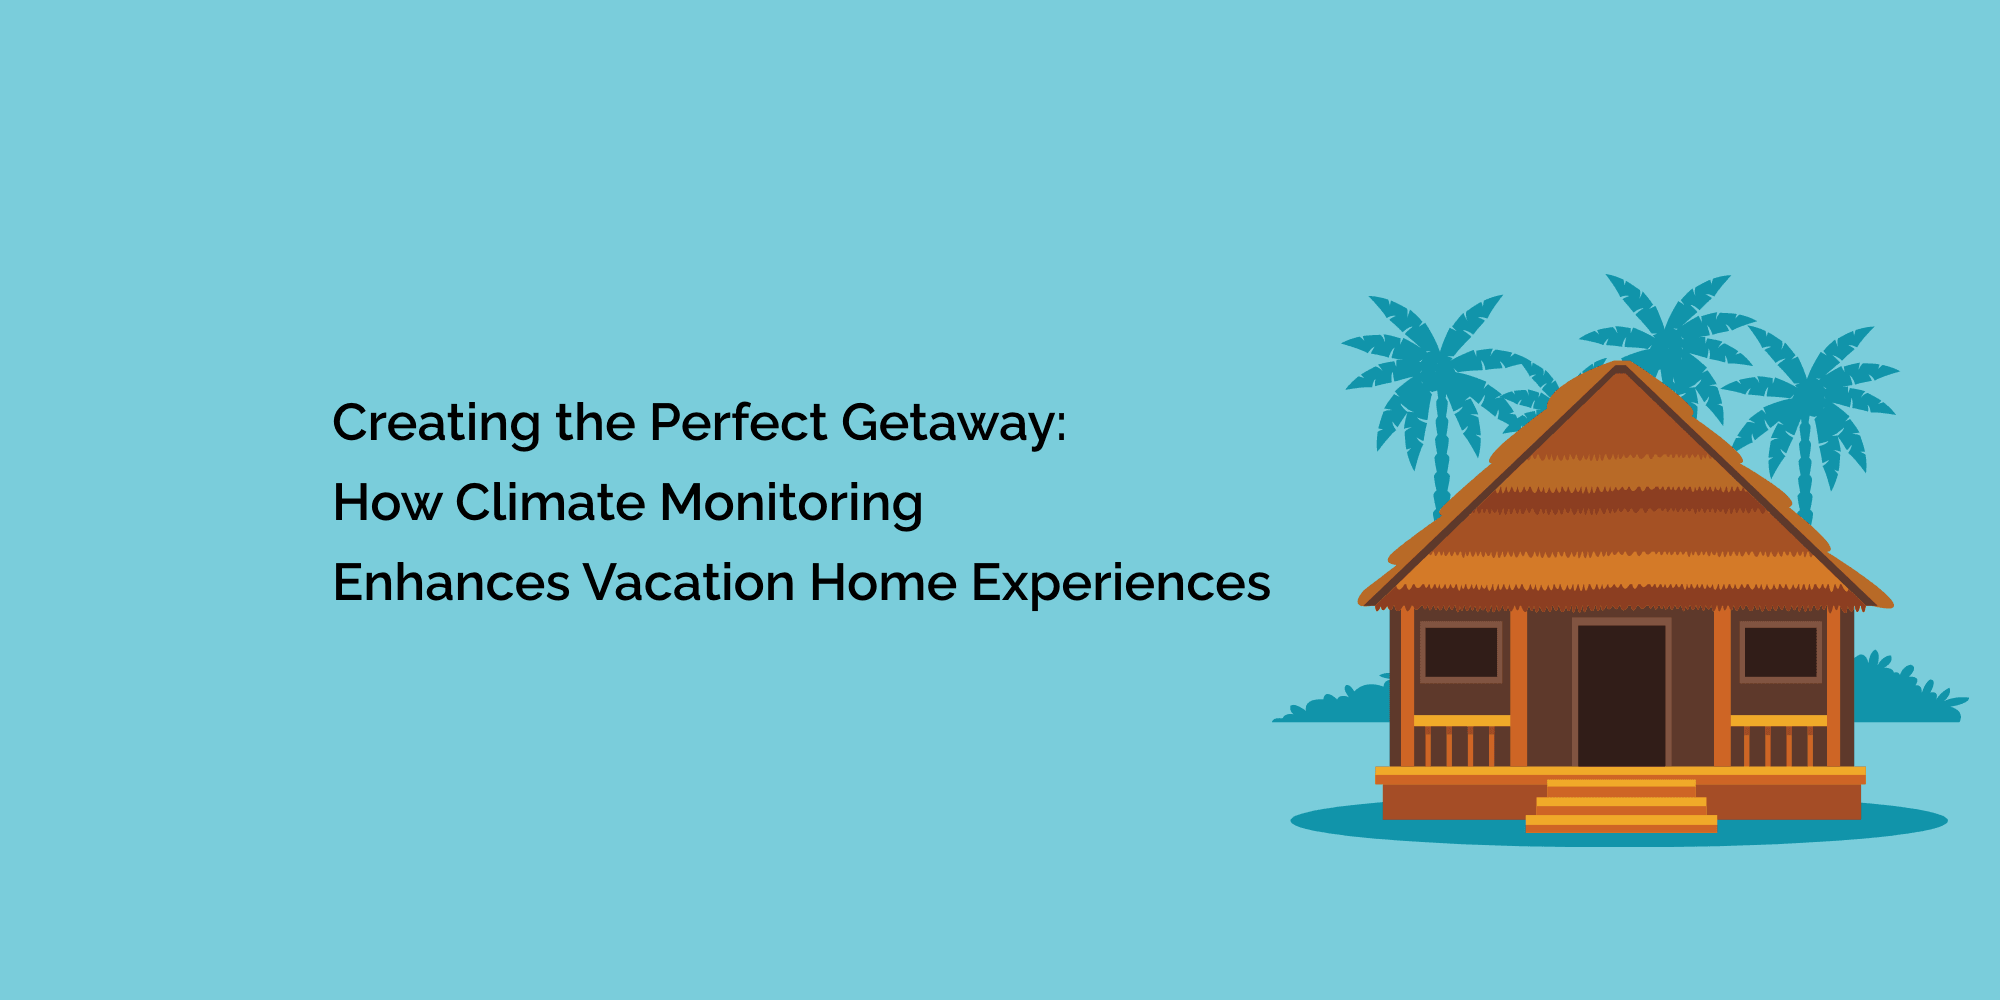 Creating the Perfect Getaway: How Climate Monitoring Enhances Vacation Home Experiences